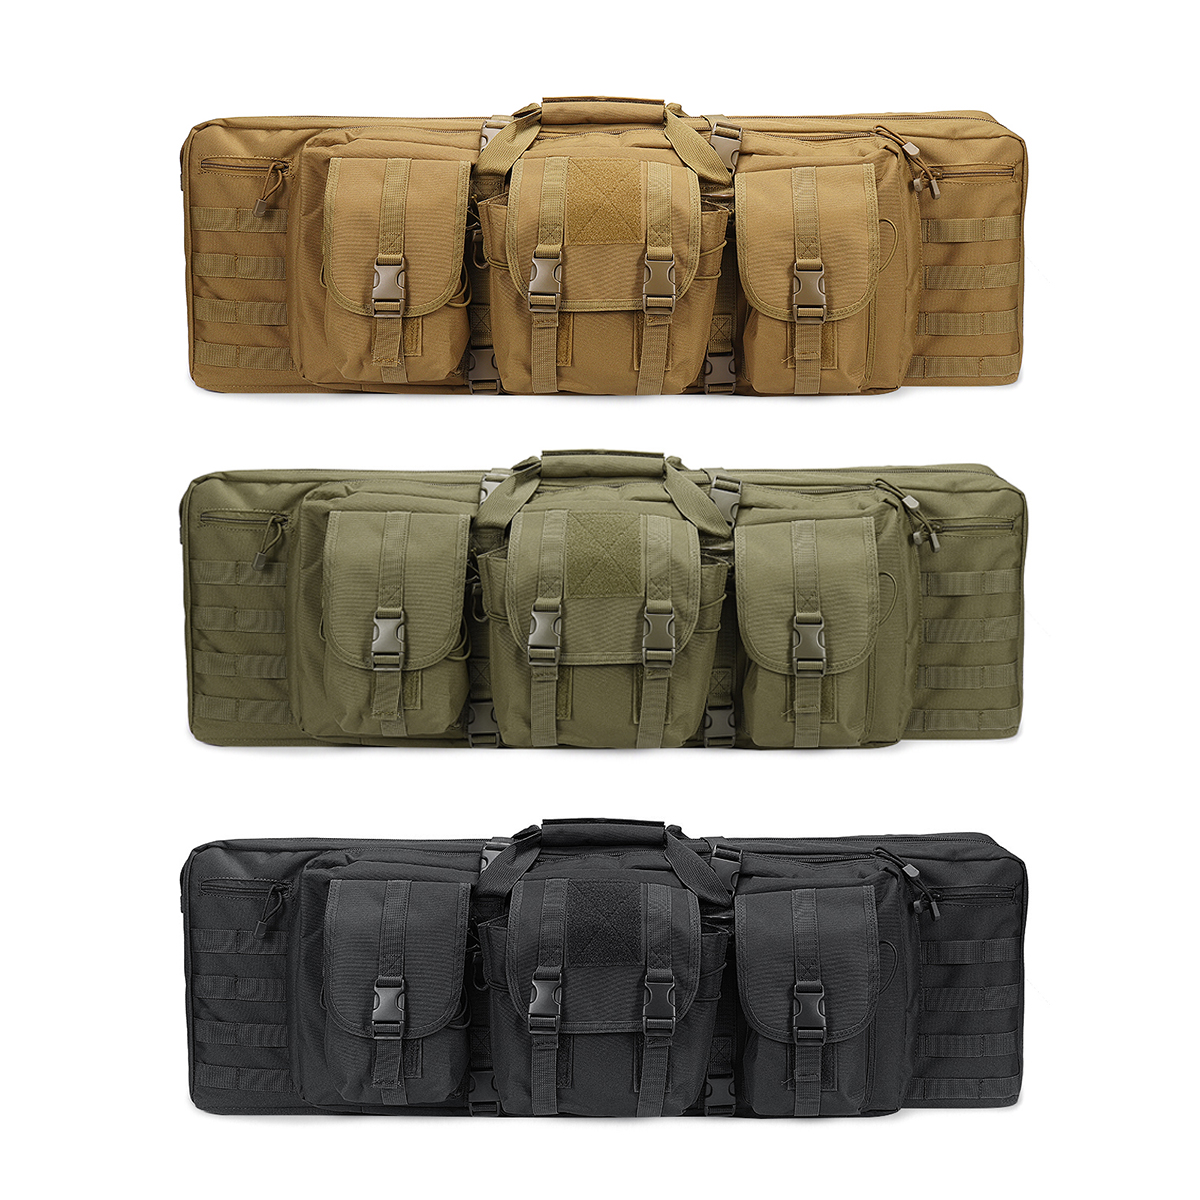 36inch-Tactical-Camouflage-Fishing-Tackle-Camping-Bag-Multifunctional-Storage-Bag-Double-Padded-Back-1853242-4